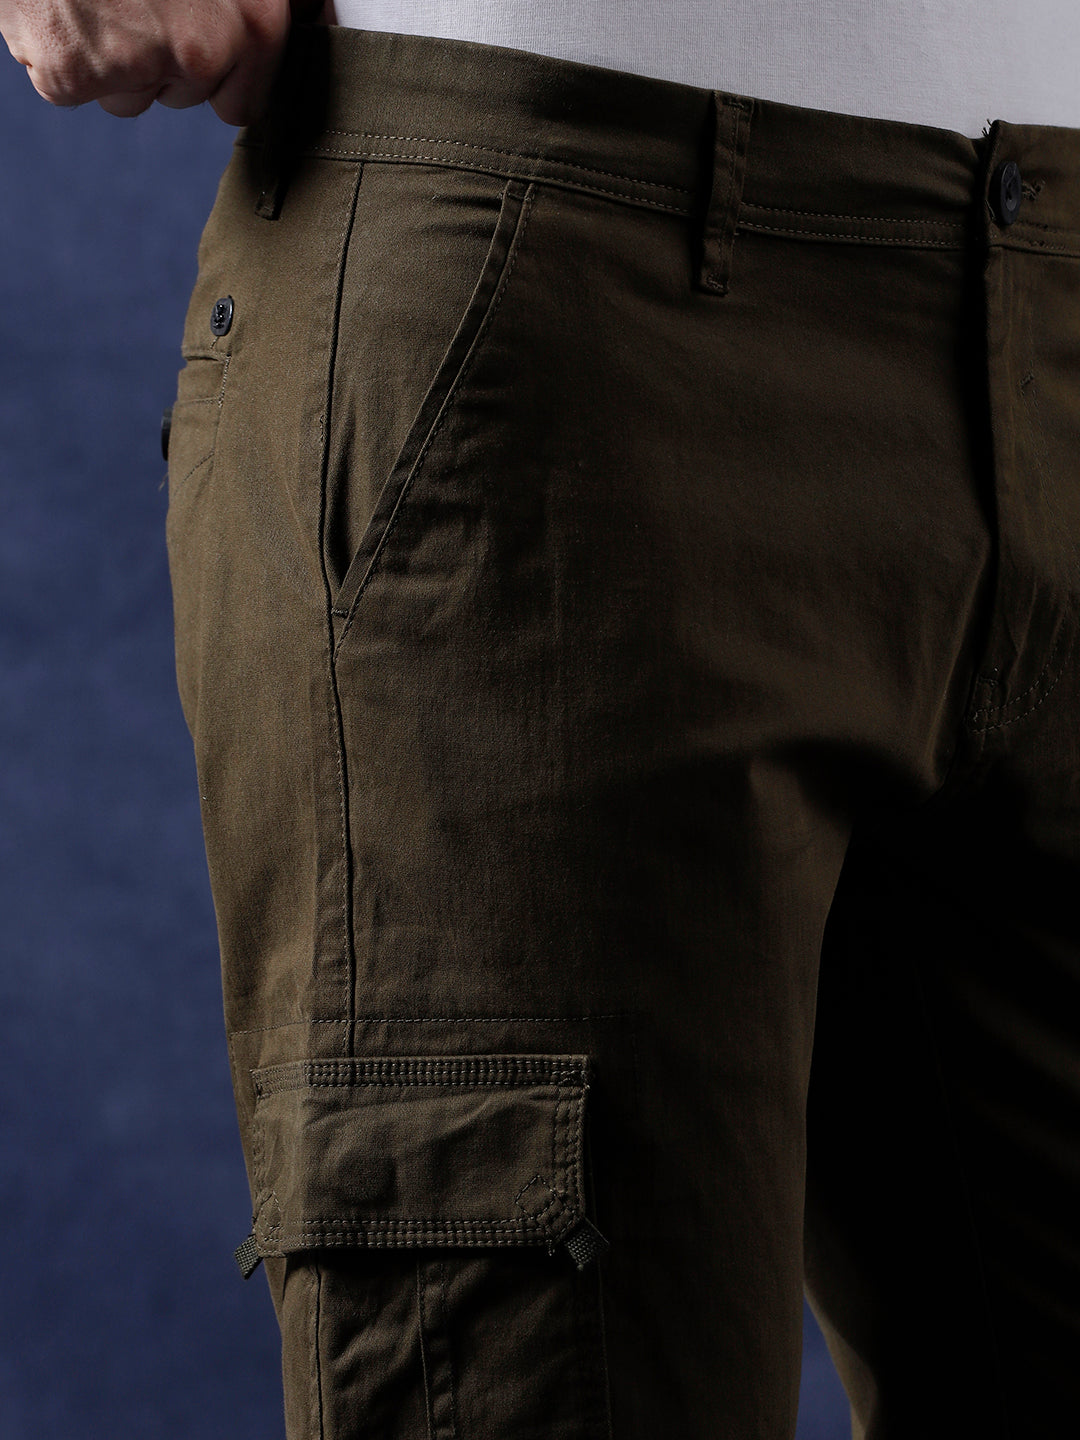 Solid Tan Cargo Pant